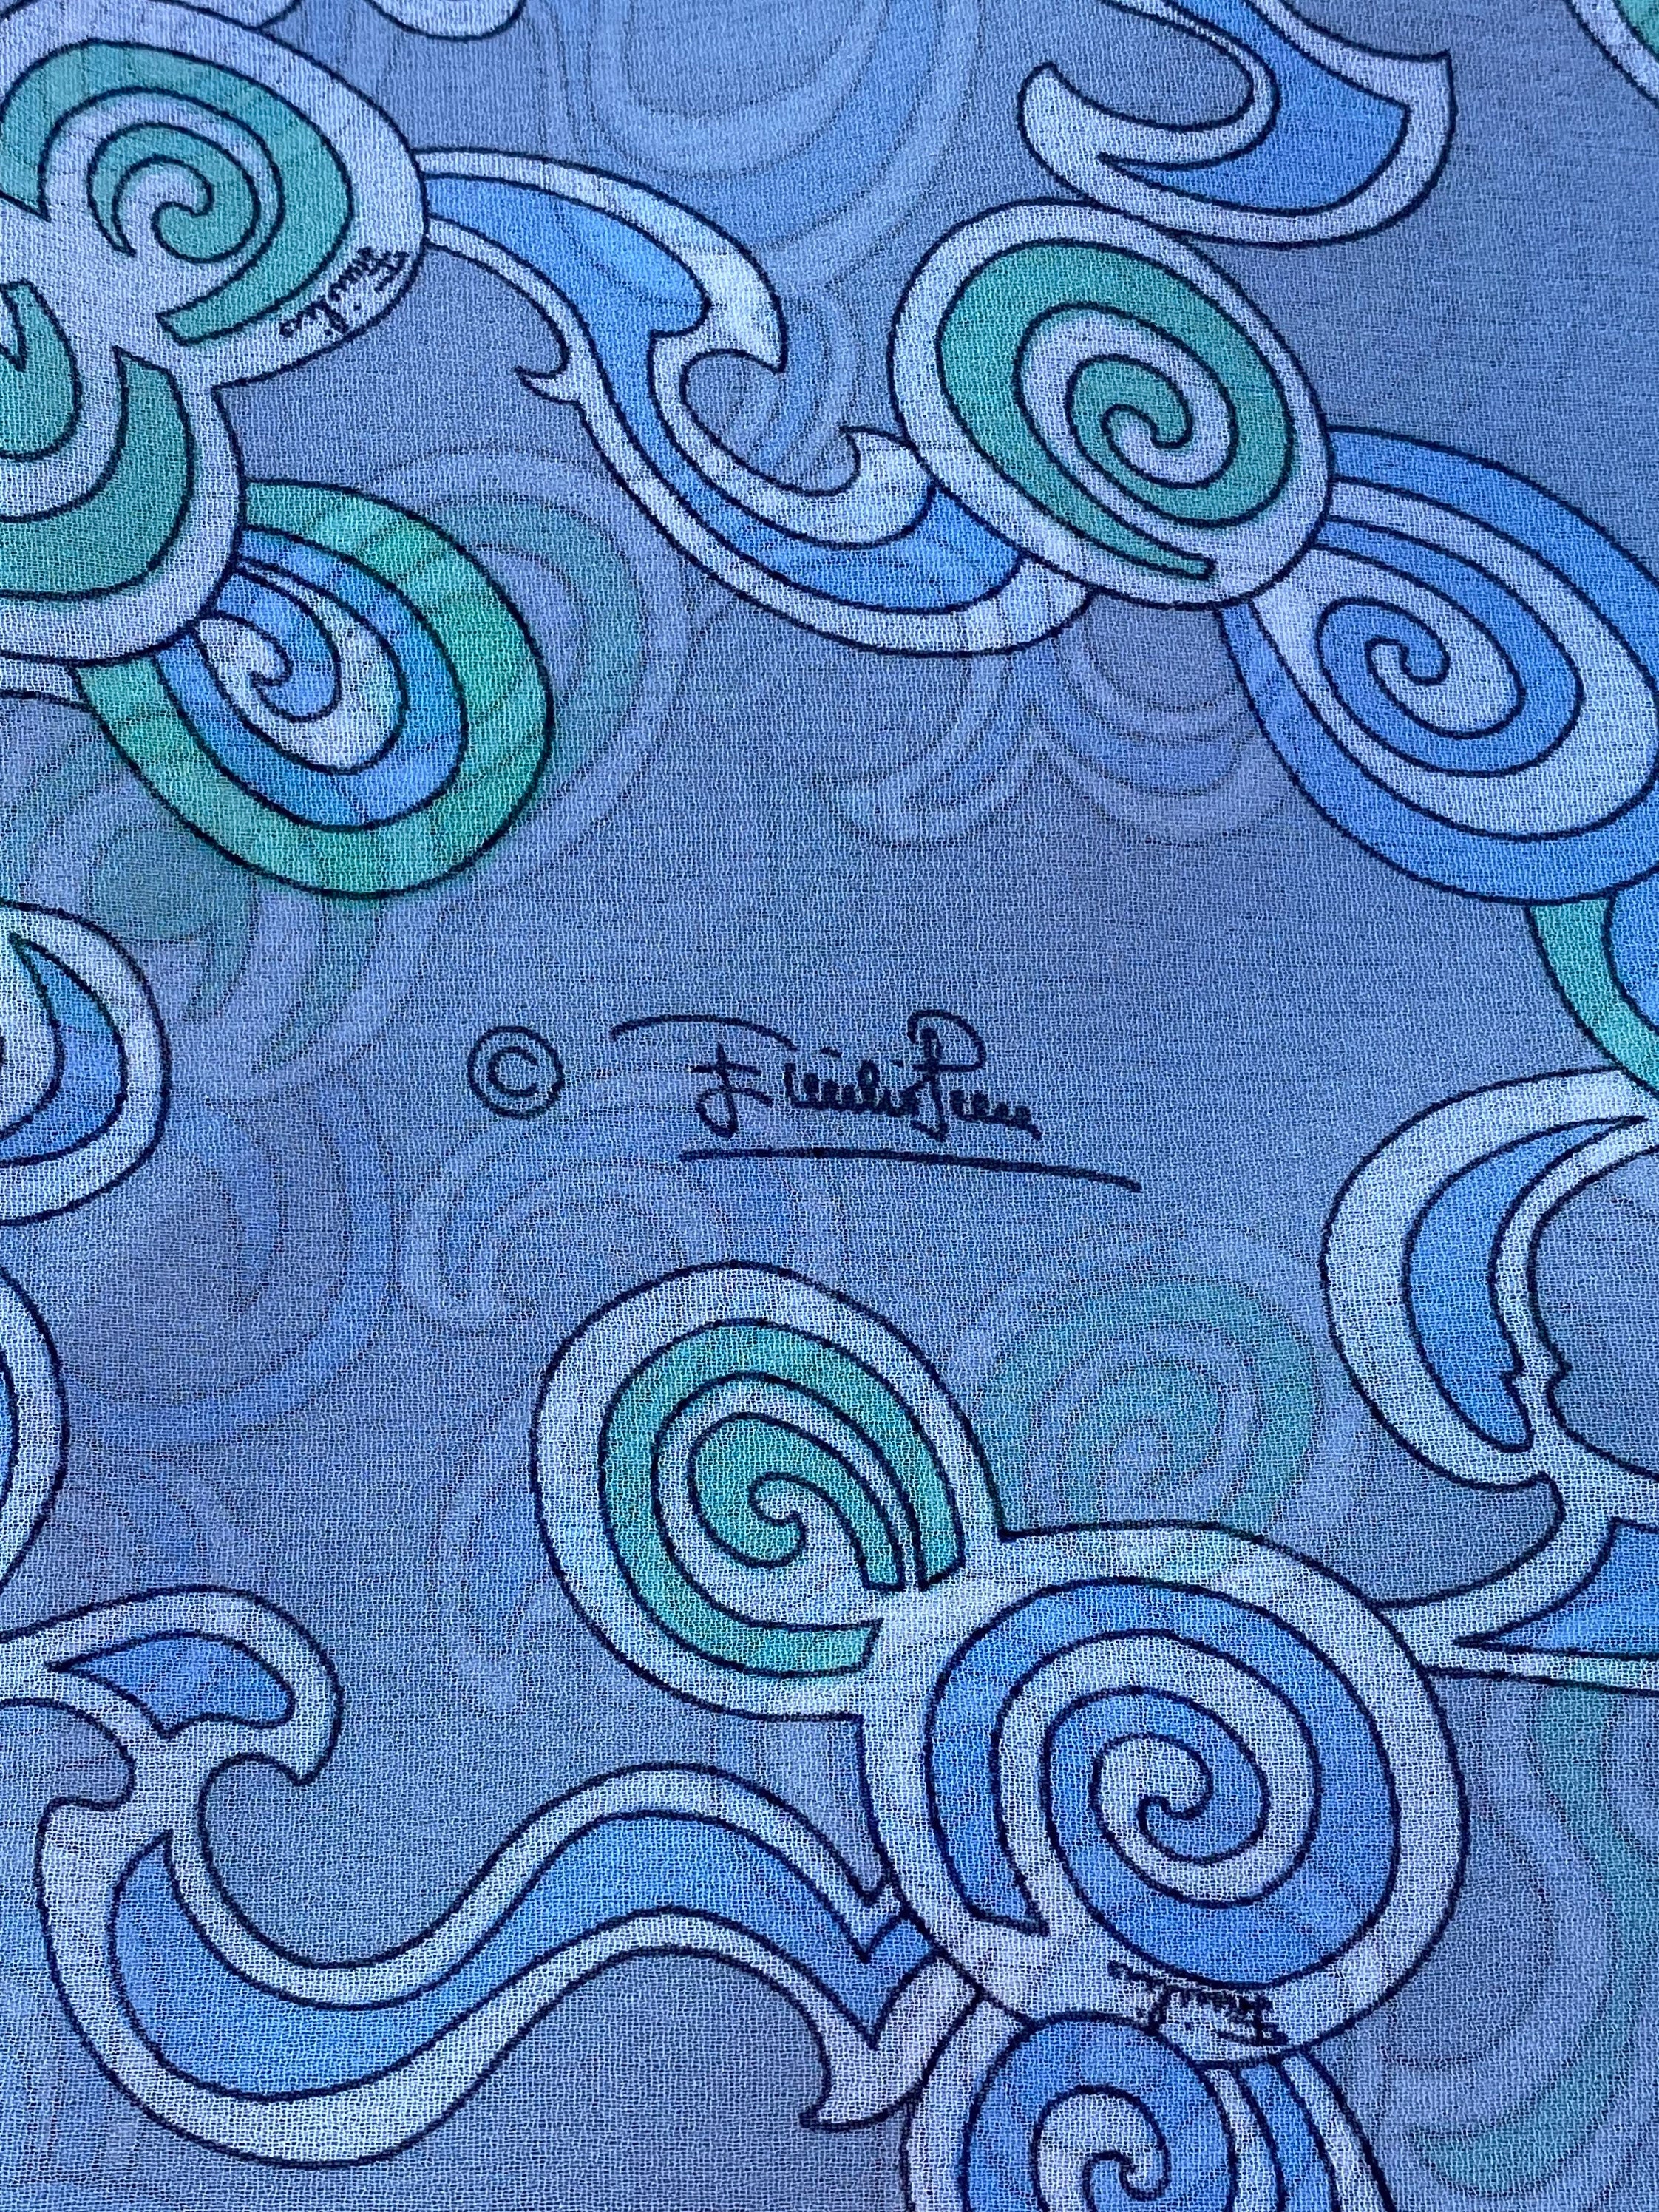 NEW! 100% Silk Chiffon Pucci Inspired Fabric Pink Blue Floral By